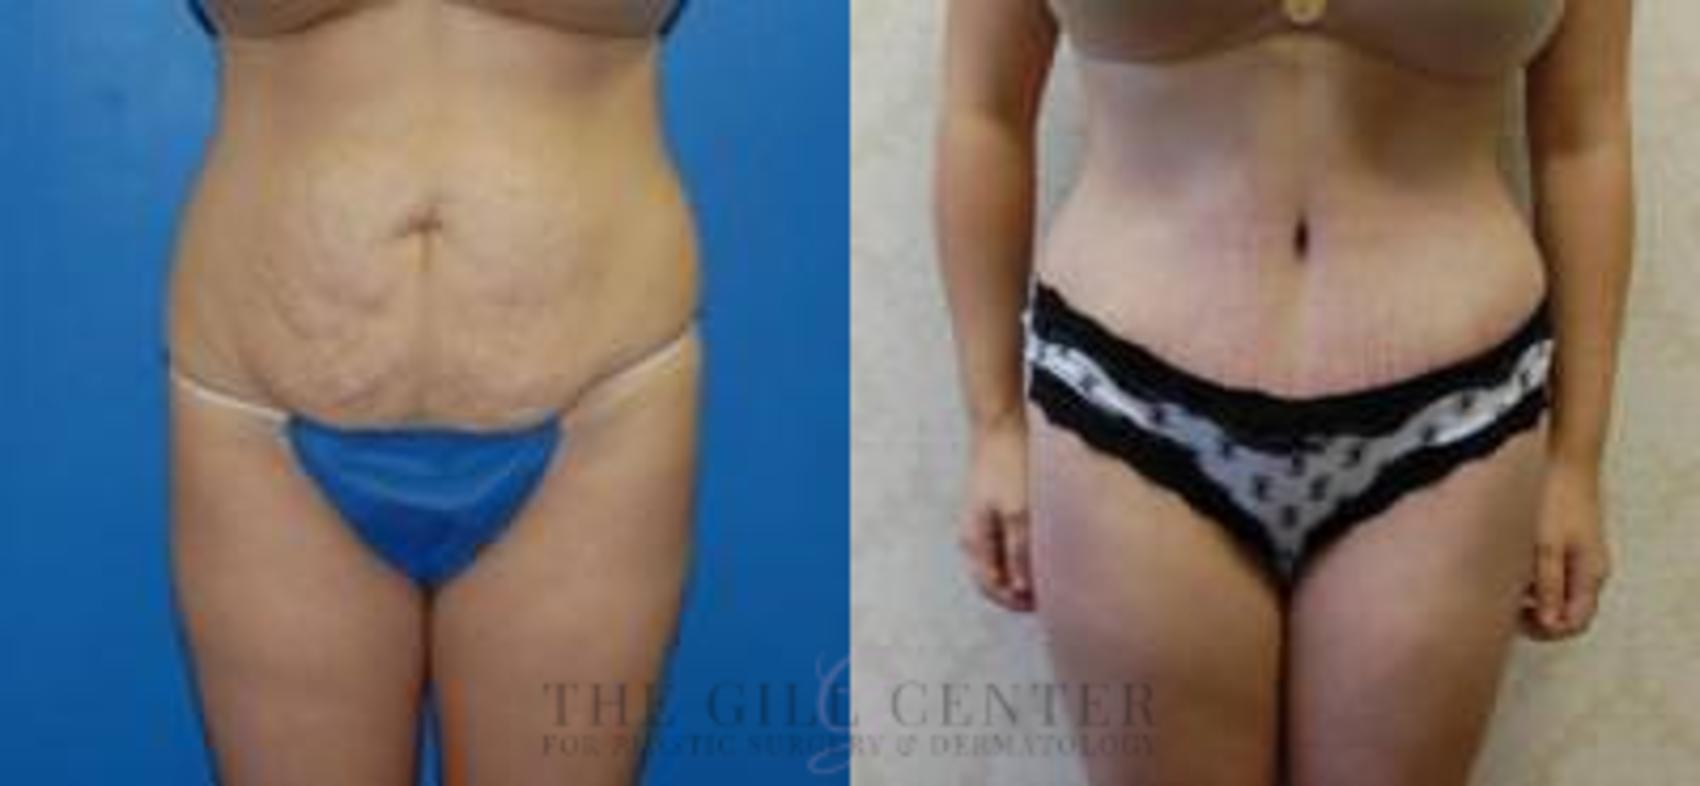 Tummy Tuck Case 251 Before & After Front | The Woodlands, TX | The Gill Center for Plastic Surgery and Dermatology